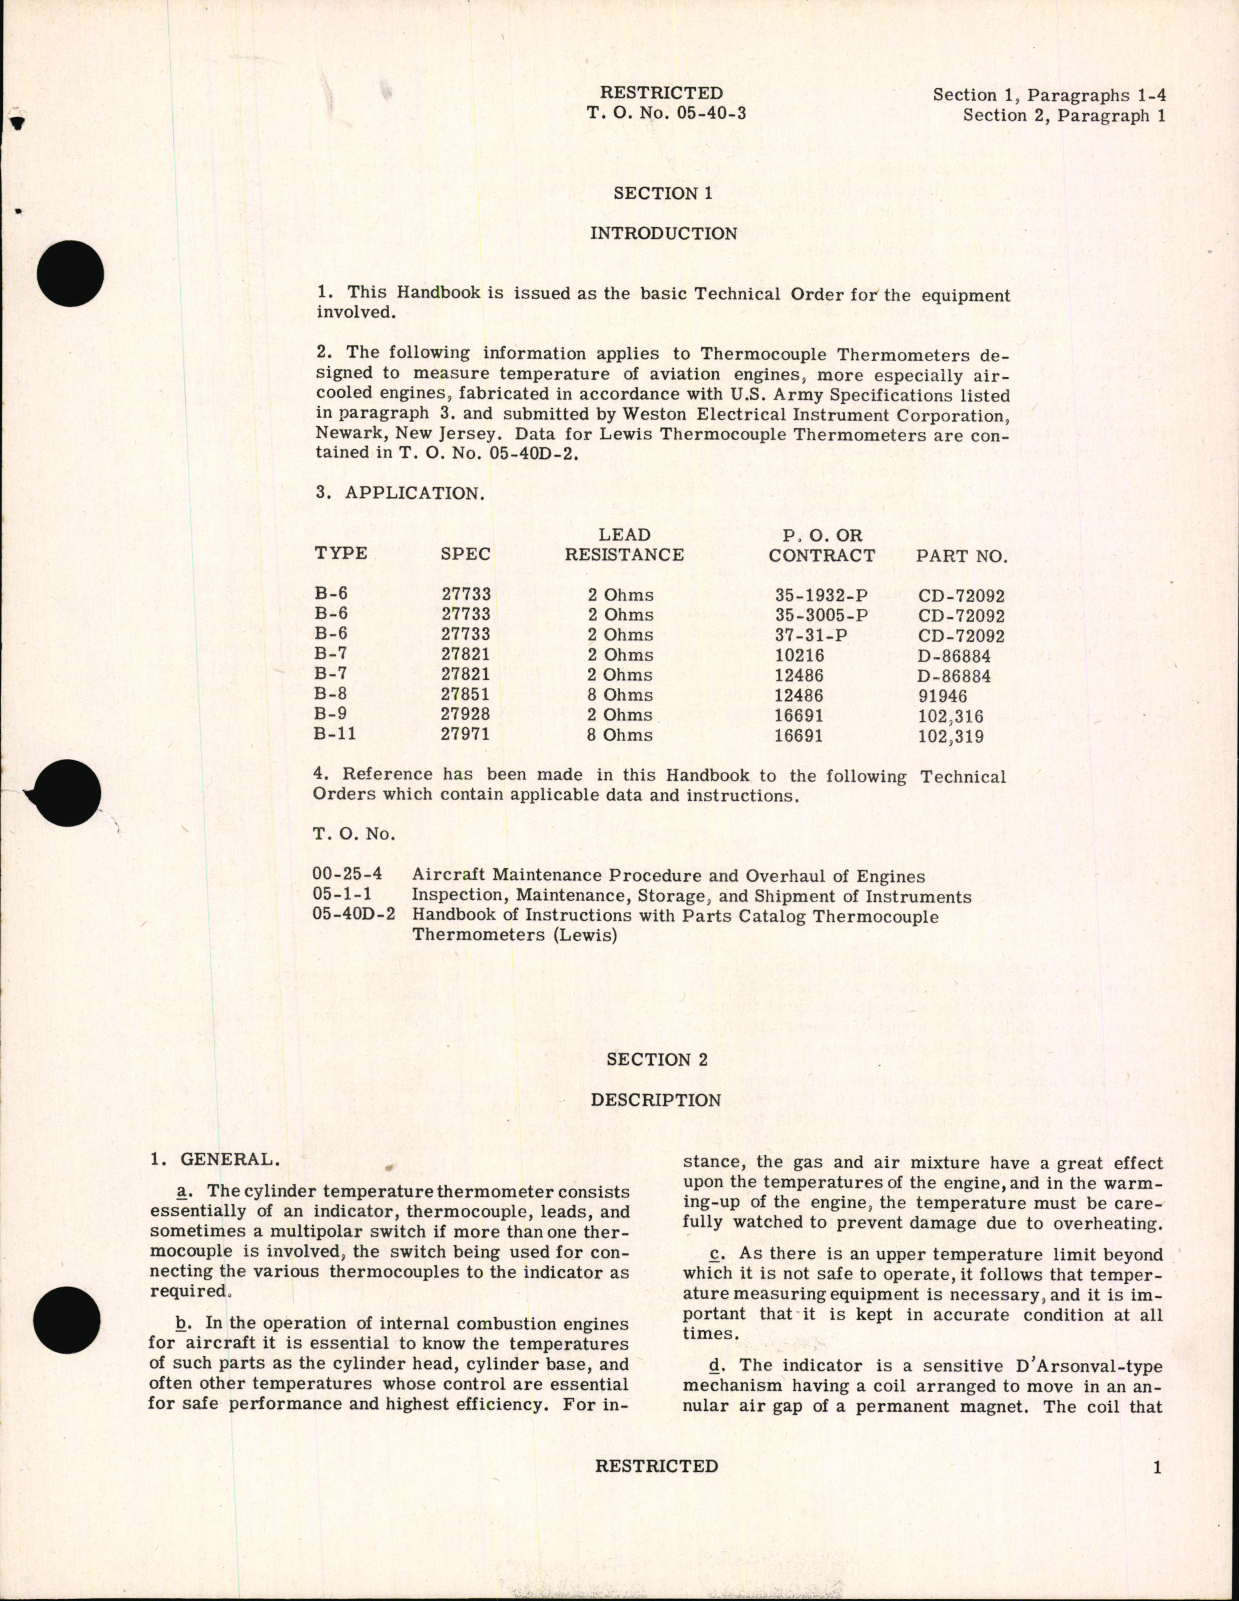 Sample page 7 from AirCorps Library document: Handbook of Instructions with Parts Catalog for Thermocouple Thermometers